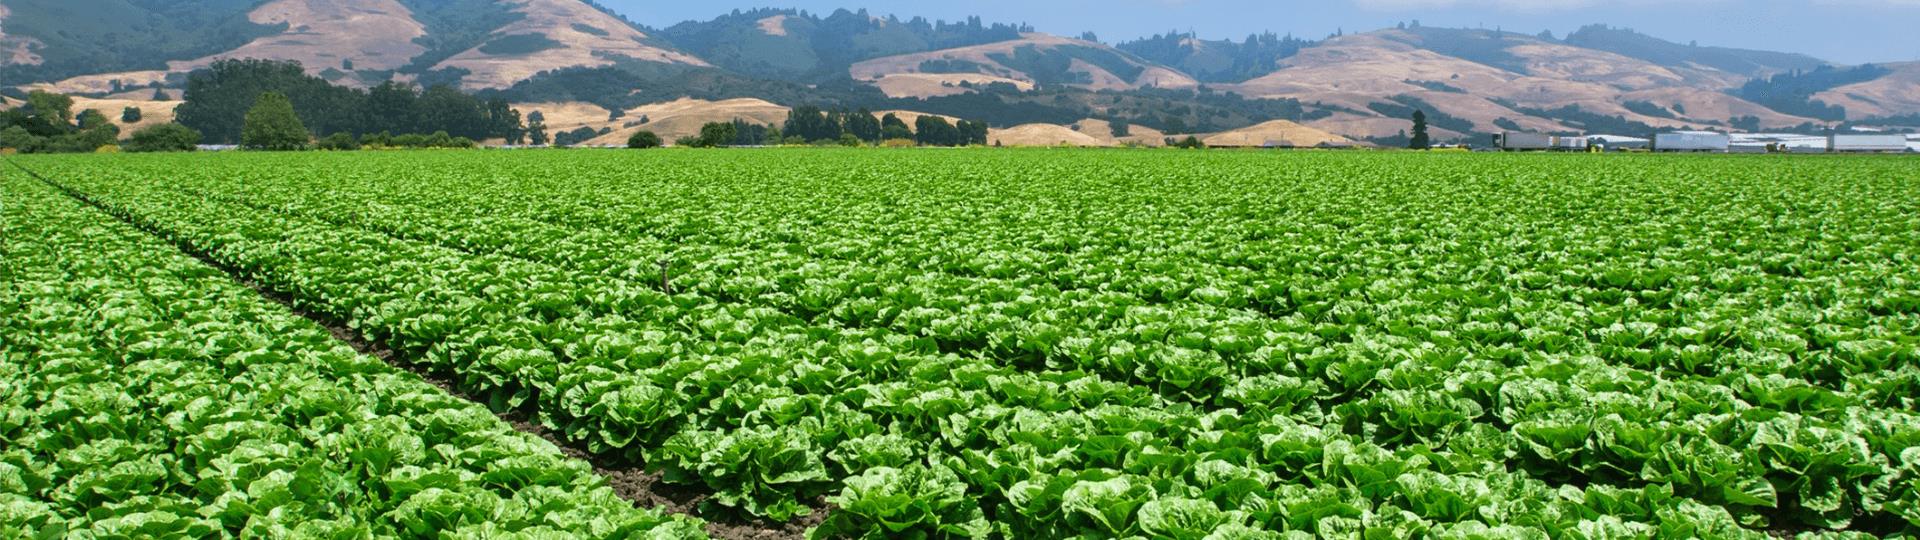 Large agricultural field with rows of green leafy vegetables. Hills in the background.